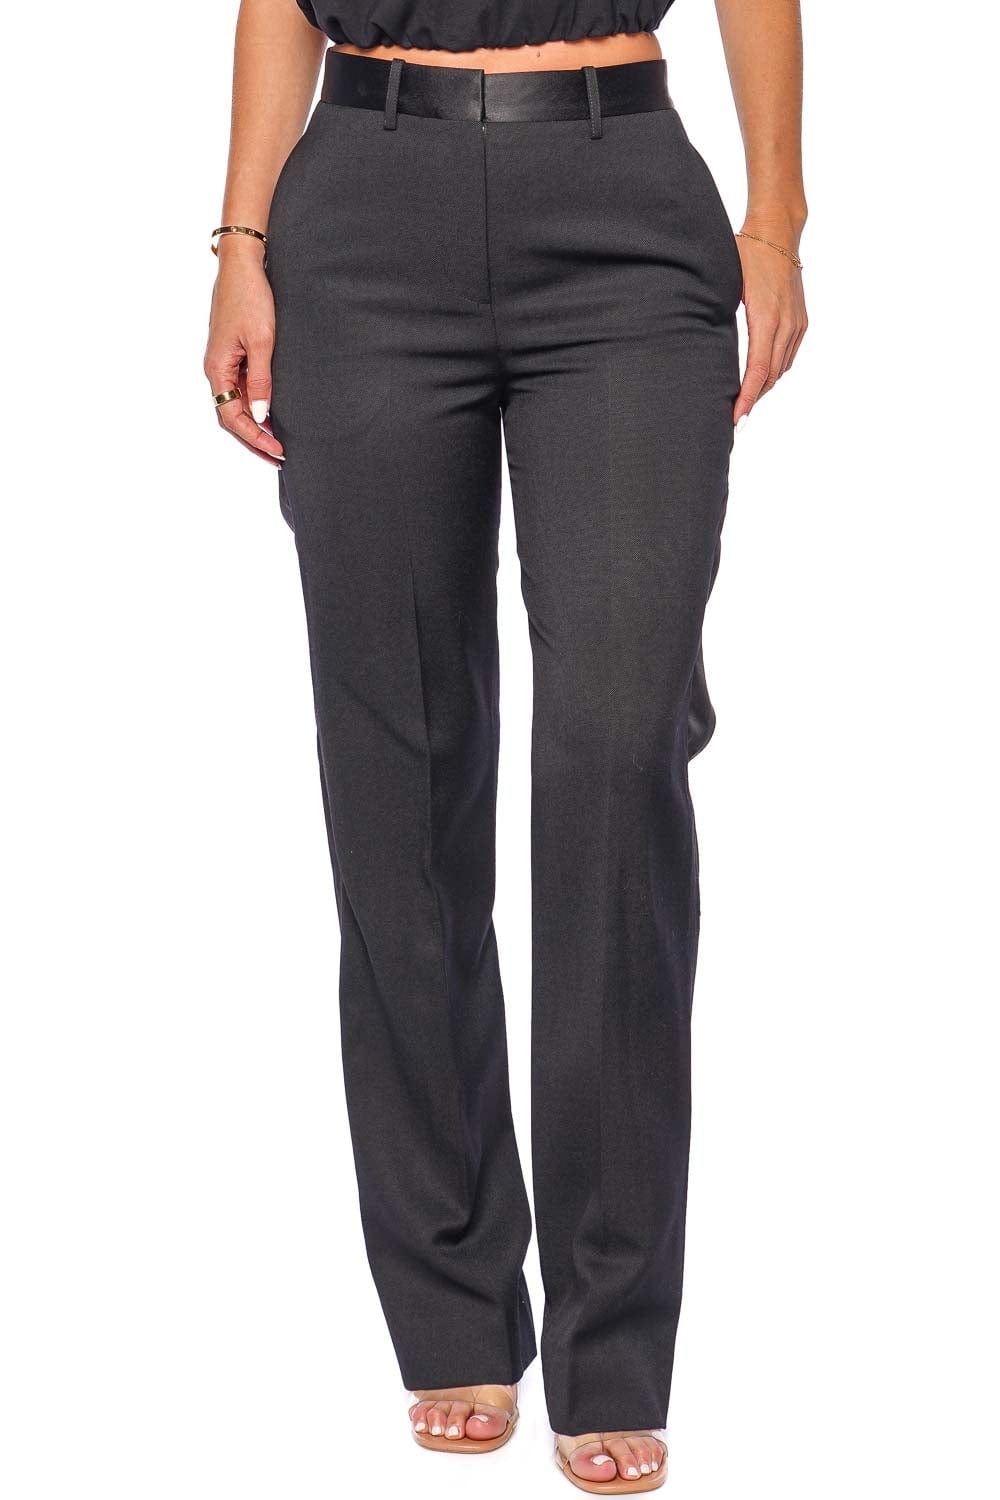 Victoria Beckham Black Pleated Tapered Trouser